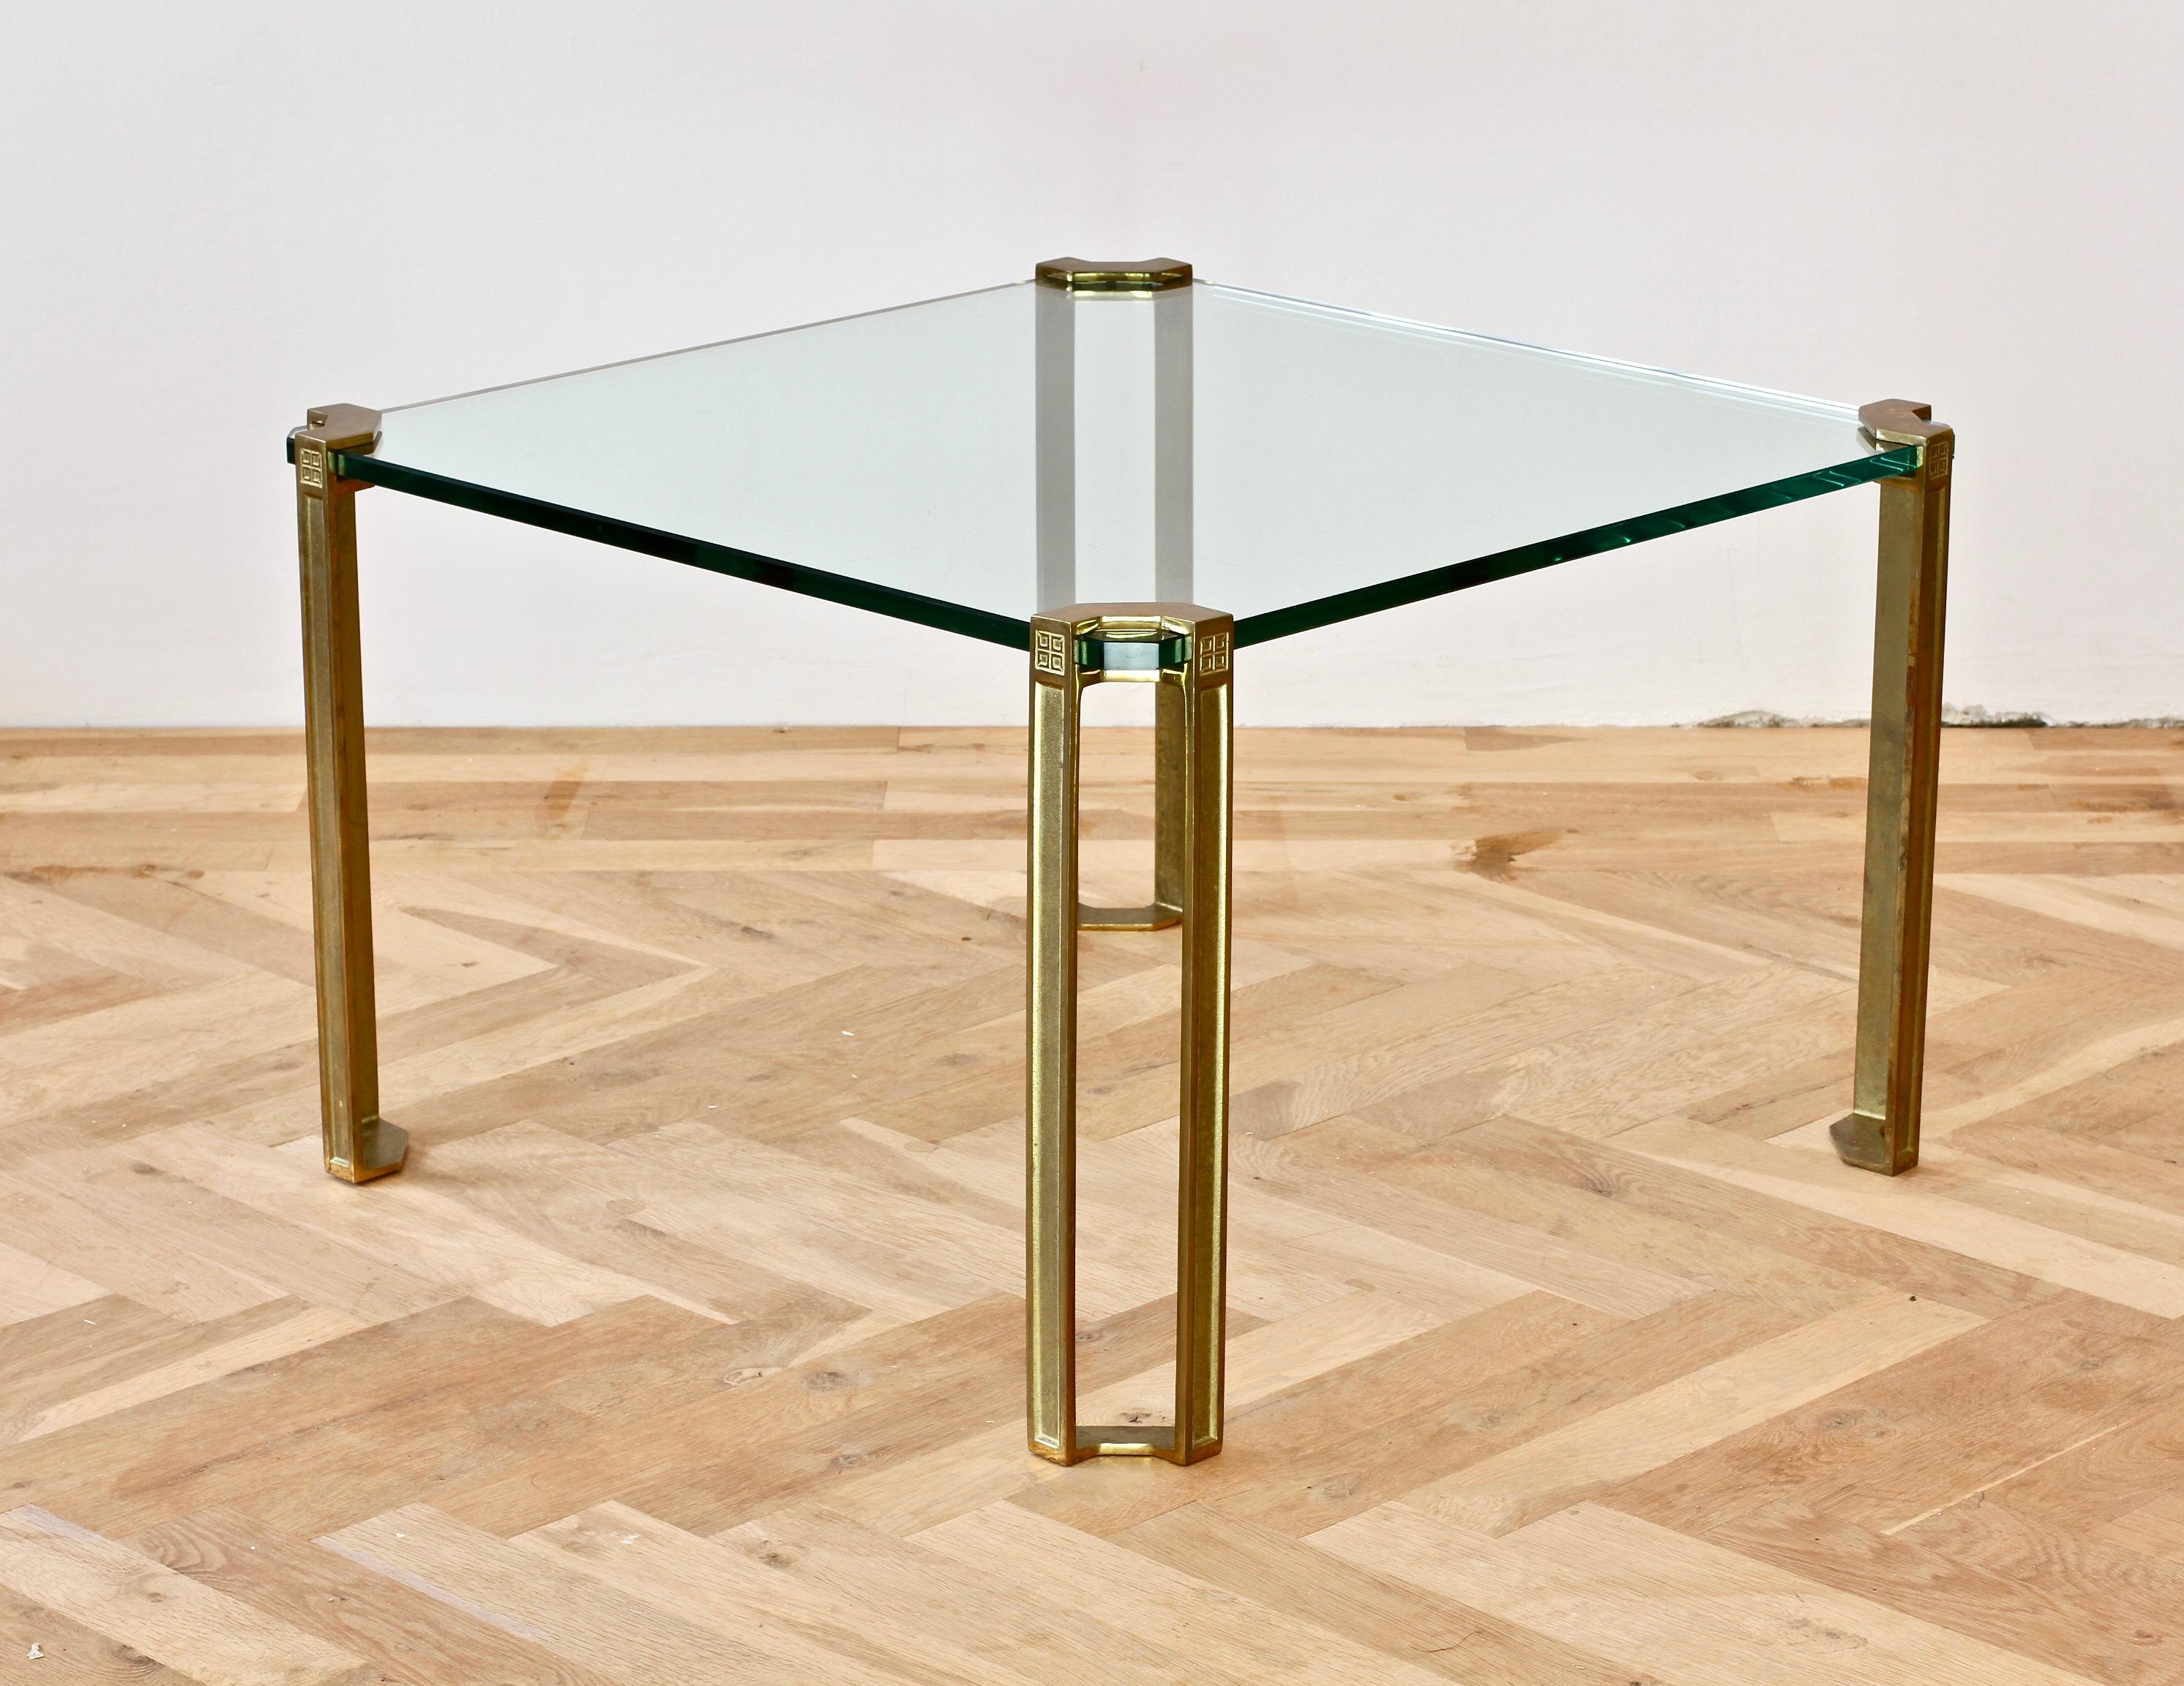 Peter Ghyczy 'T24 Pioneer' square end or coffee table in cast brass. Designed by Hungarian born designer Peter Ghyczy circa 1975 featuring his pioneering casting techniques and way of suspending glass and metal.

Thick 15mm clear glass table top.